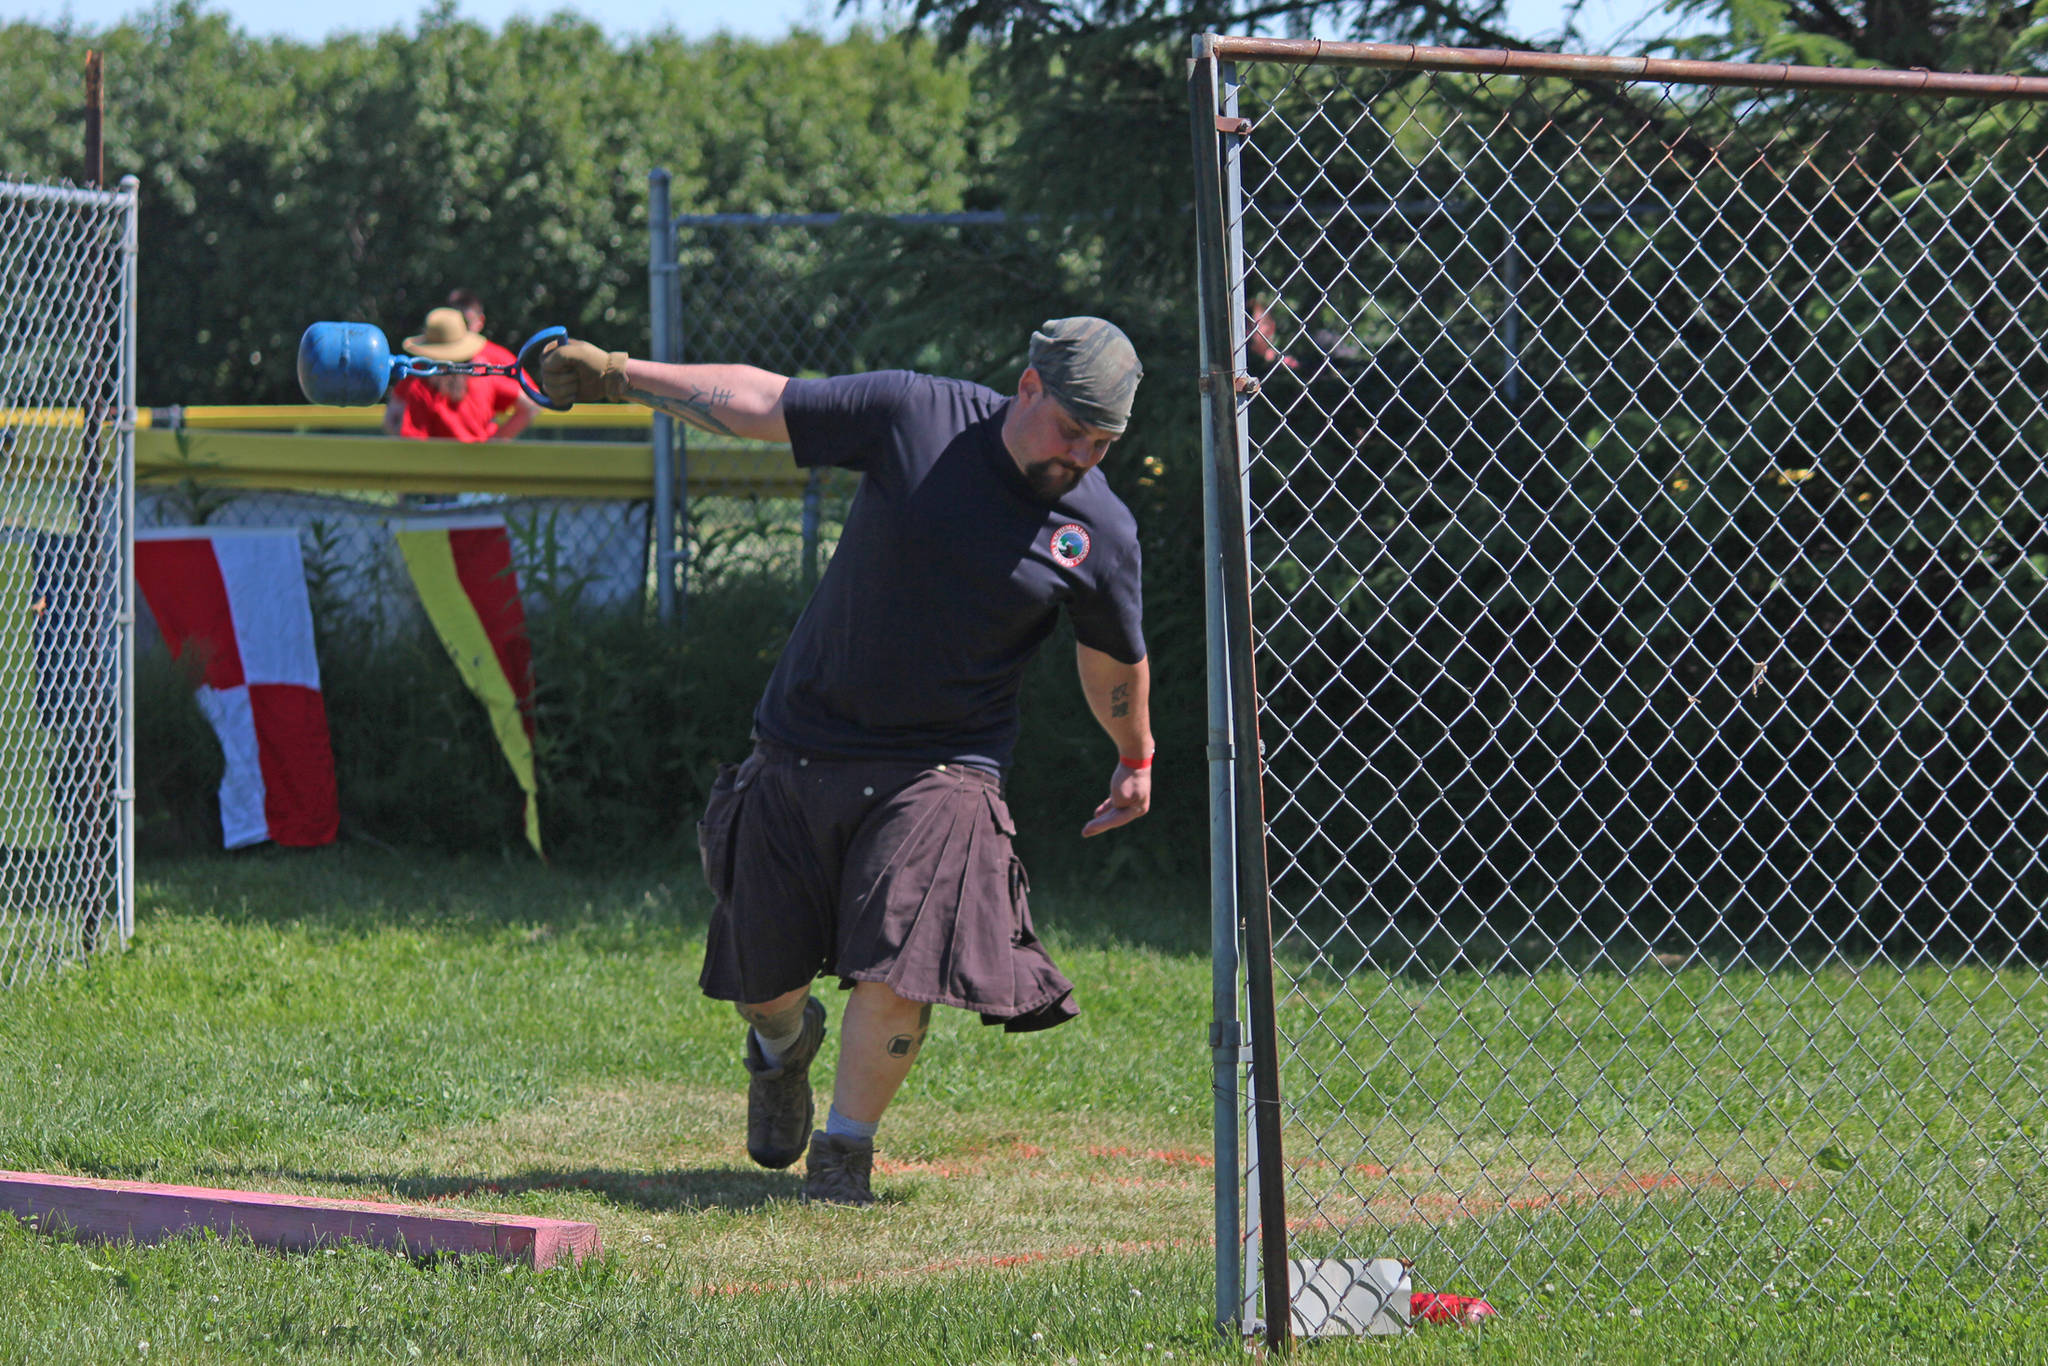 Travis Ogden prepares to throw a weight in the weight throw for distance competition Saturday, July 7, 2017 at the Kachemak Bay Scottish Highland Games at Karen Hornaday Park in Homer, Alaska. Ogden is a firefighter and EMT 2 medic for Kachemak Emergency Services and the network security administrator for South Peninsula Hospital. (Photo by Megan Pacer/Homer News)